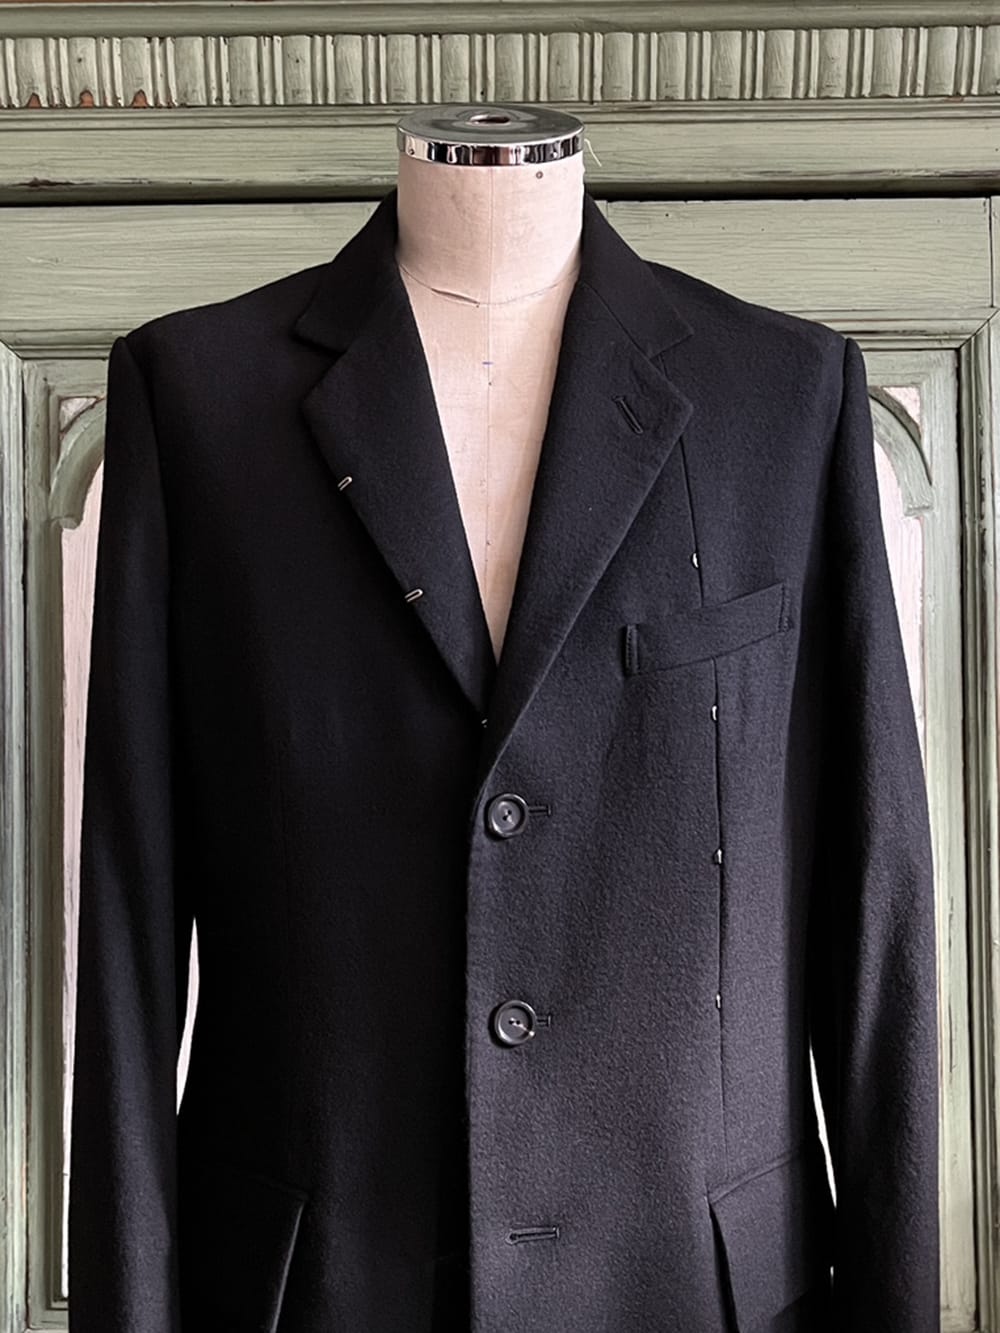 right - left chesterfield jacket.